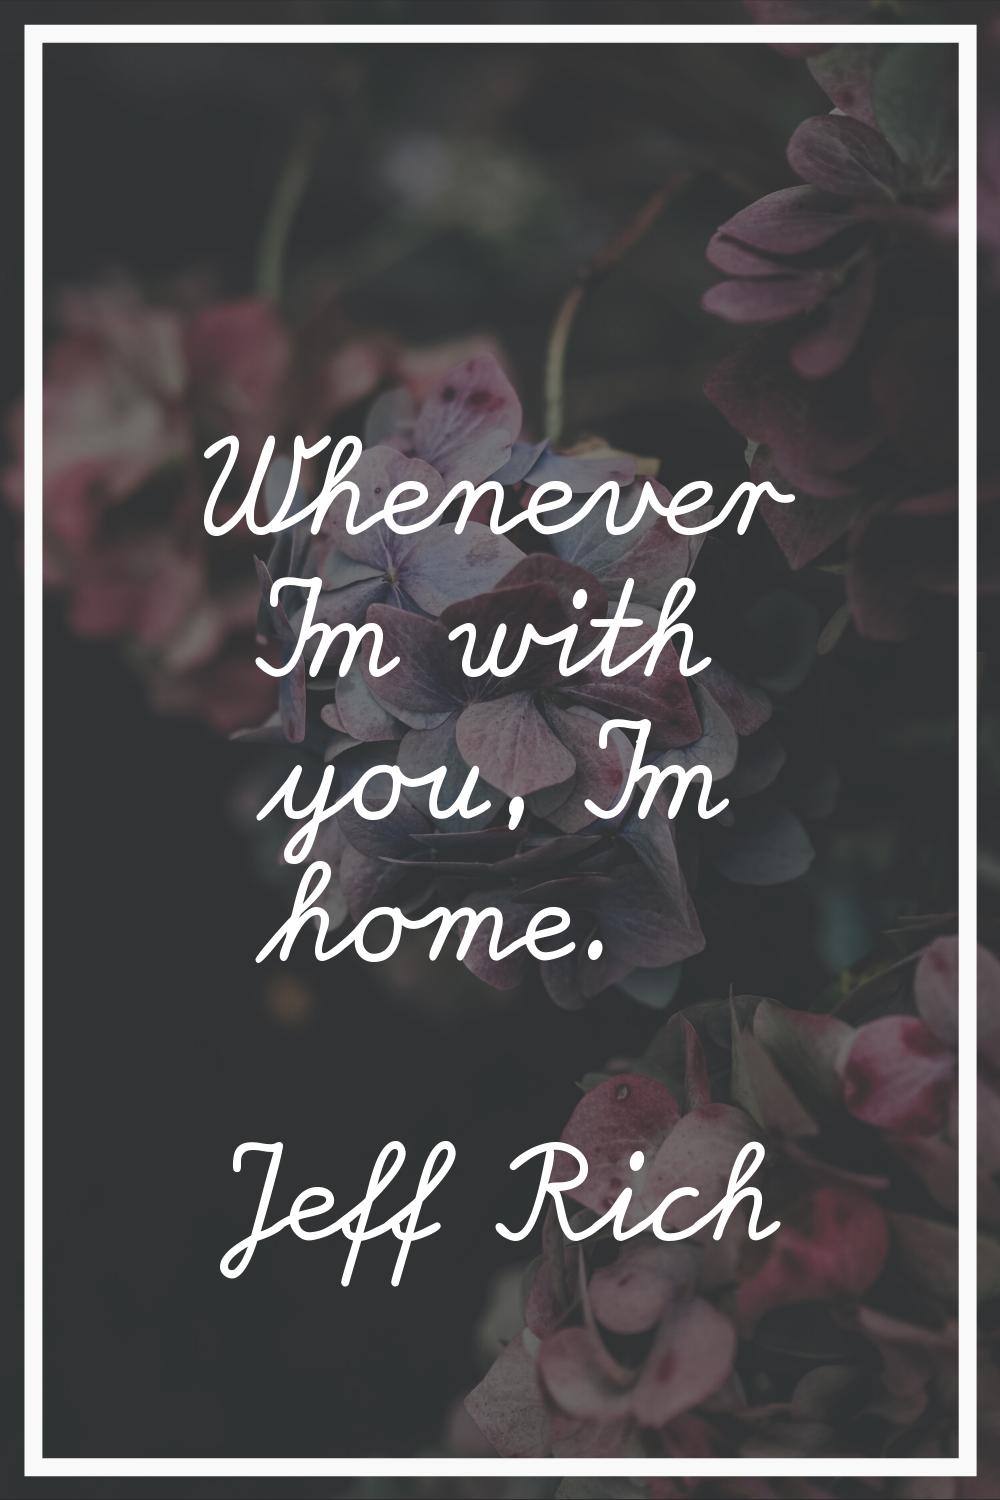 Whenever I'm with you, I'm home.